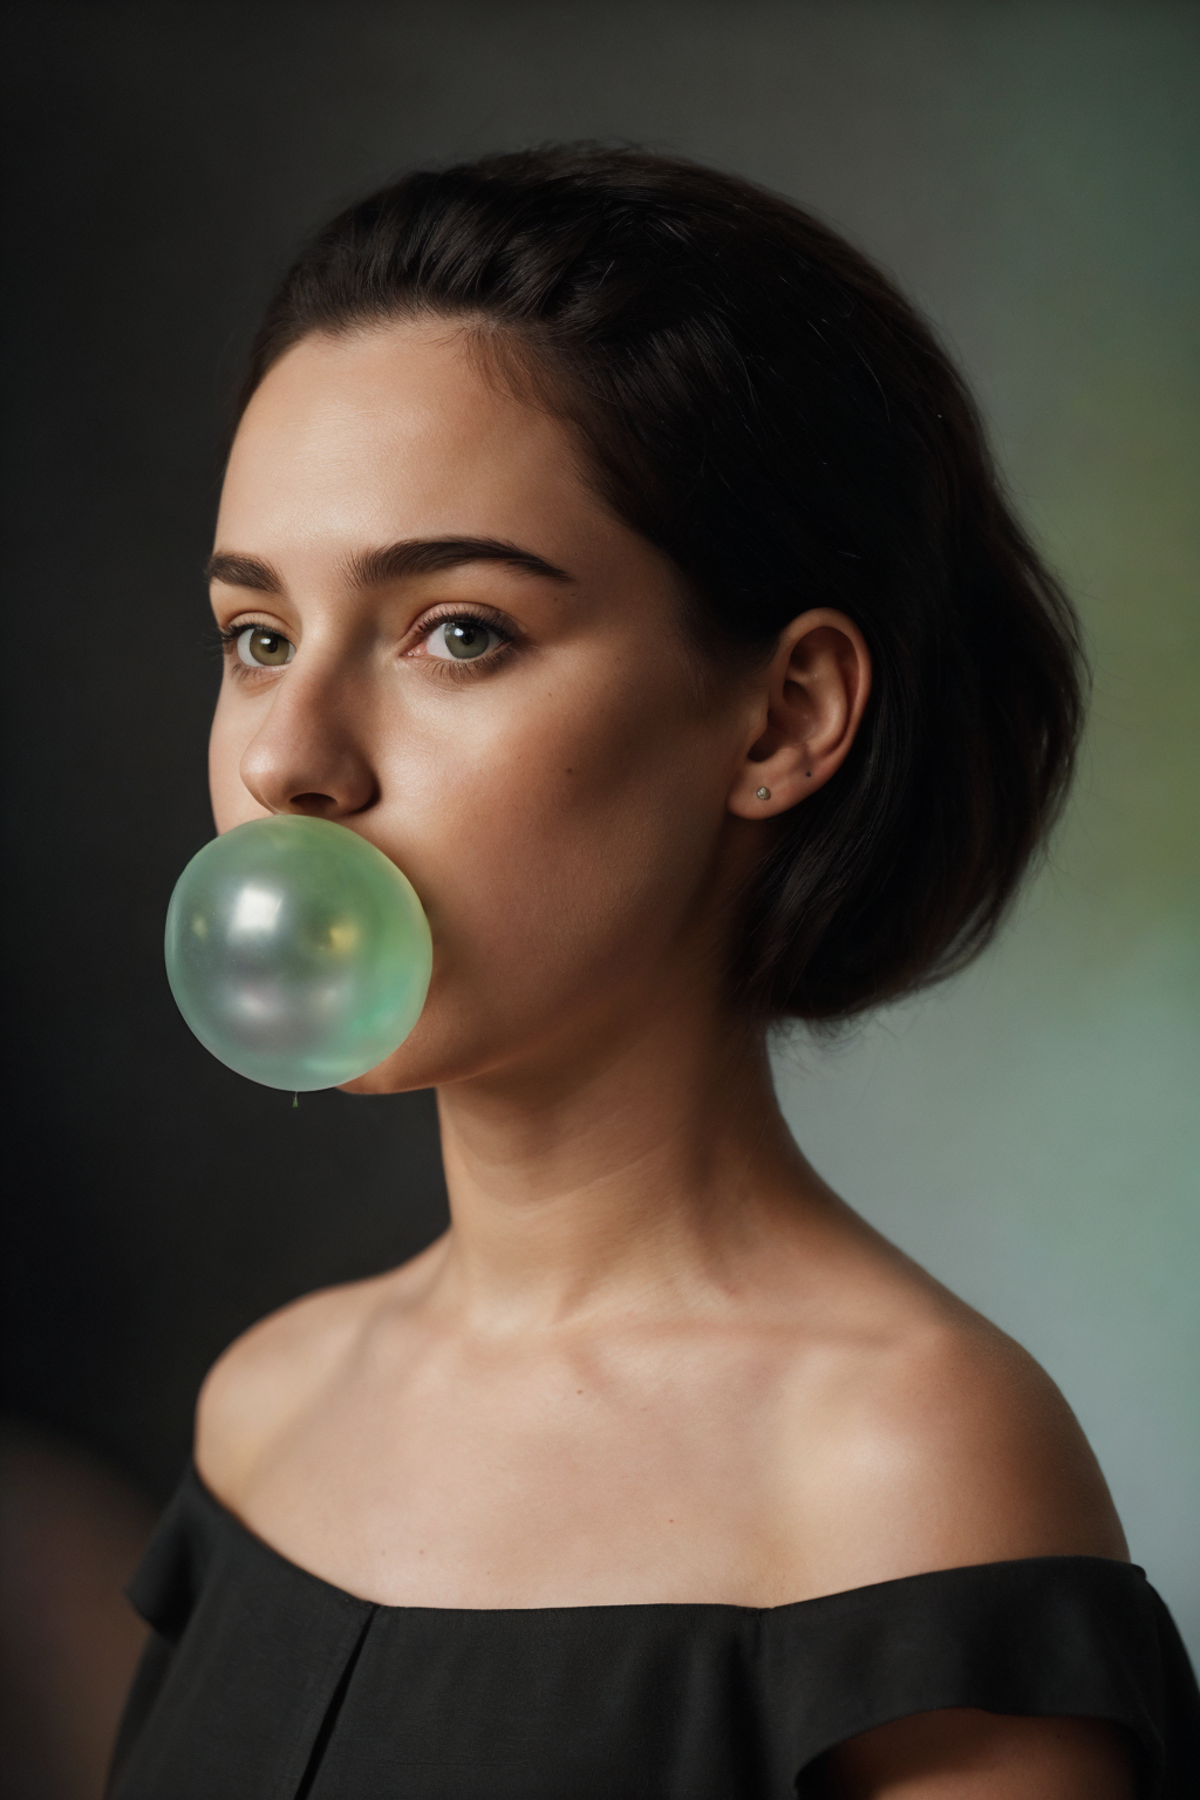 Woman with brown hair and green bubble gum in her mouth.